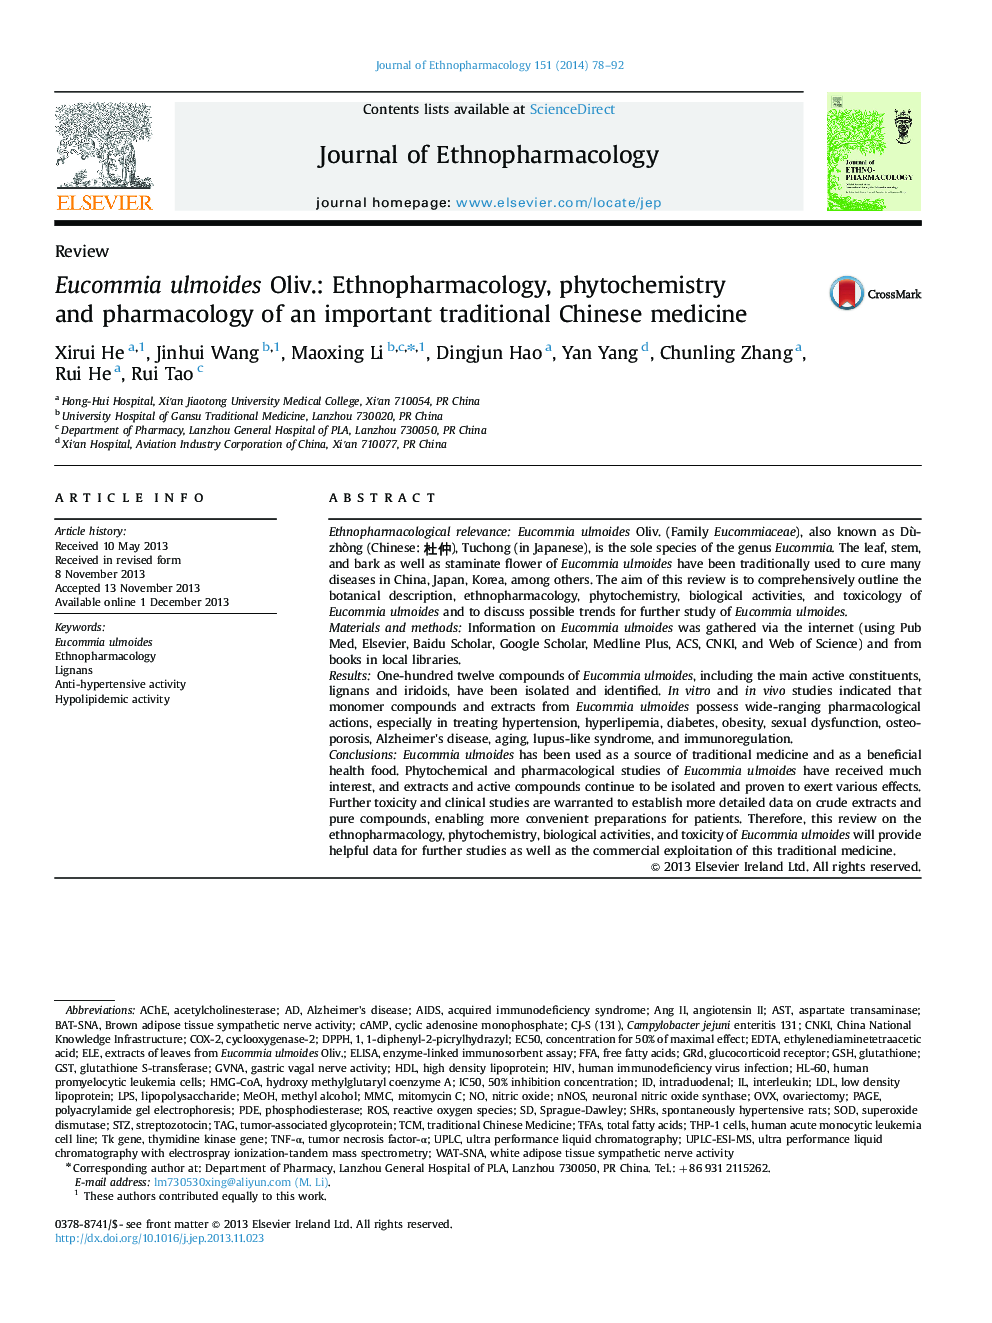 Eucommia ulmoides Oliv.: Ethnopharmacology, phytochemistry and pharmacology of an important traditional Chinese medicine